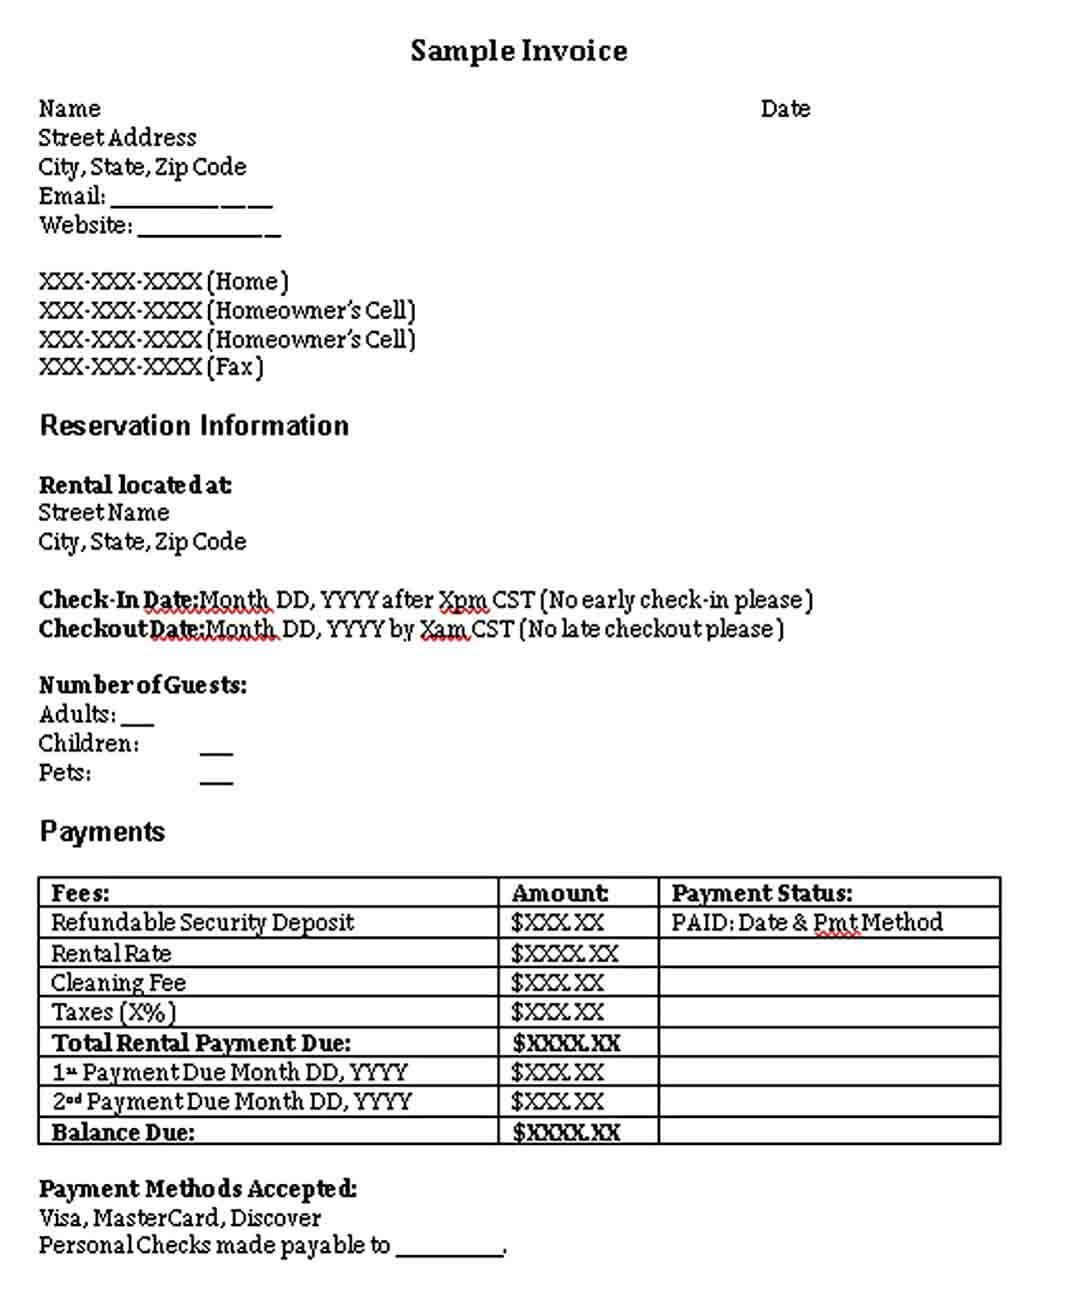 Sample Receipt for Vacation Rental Booking